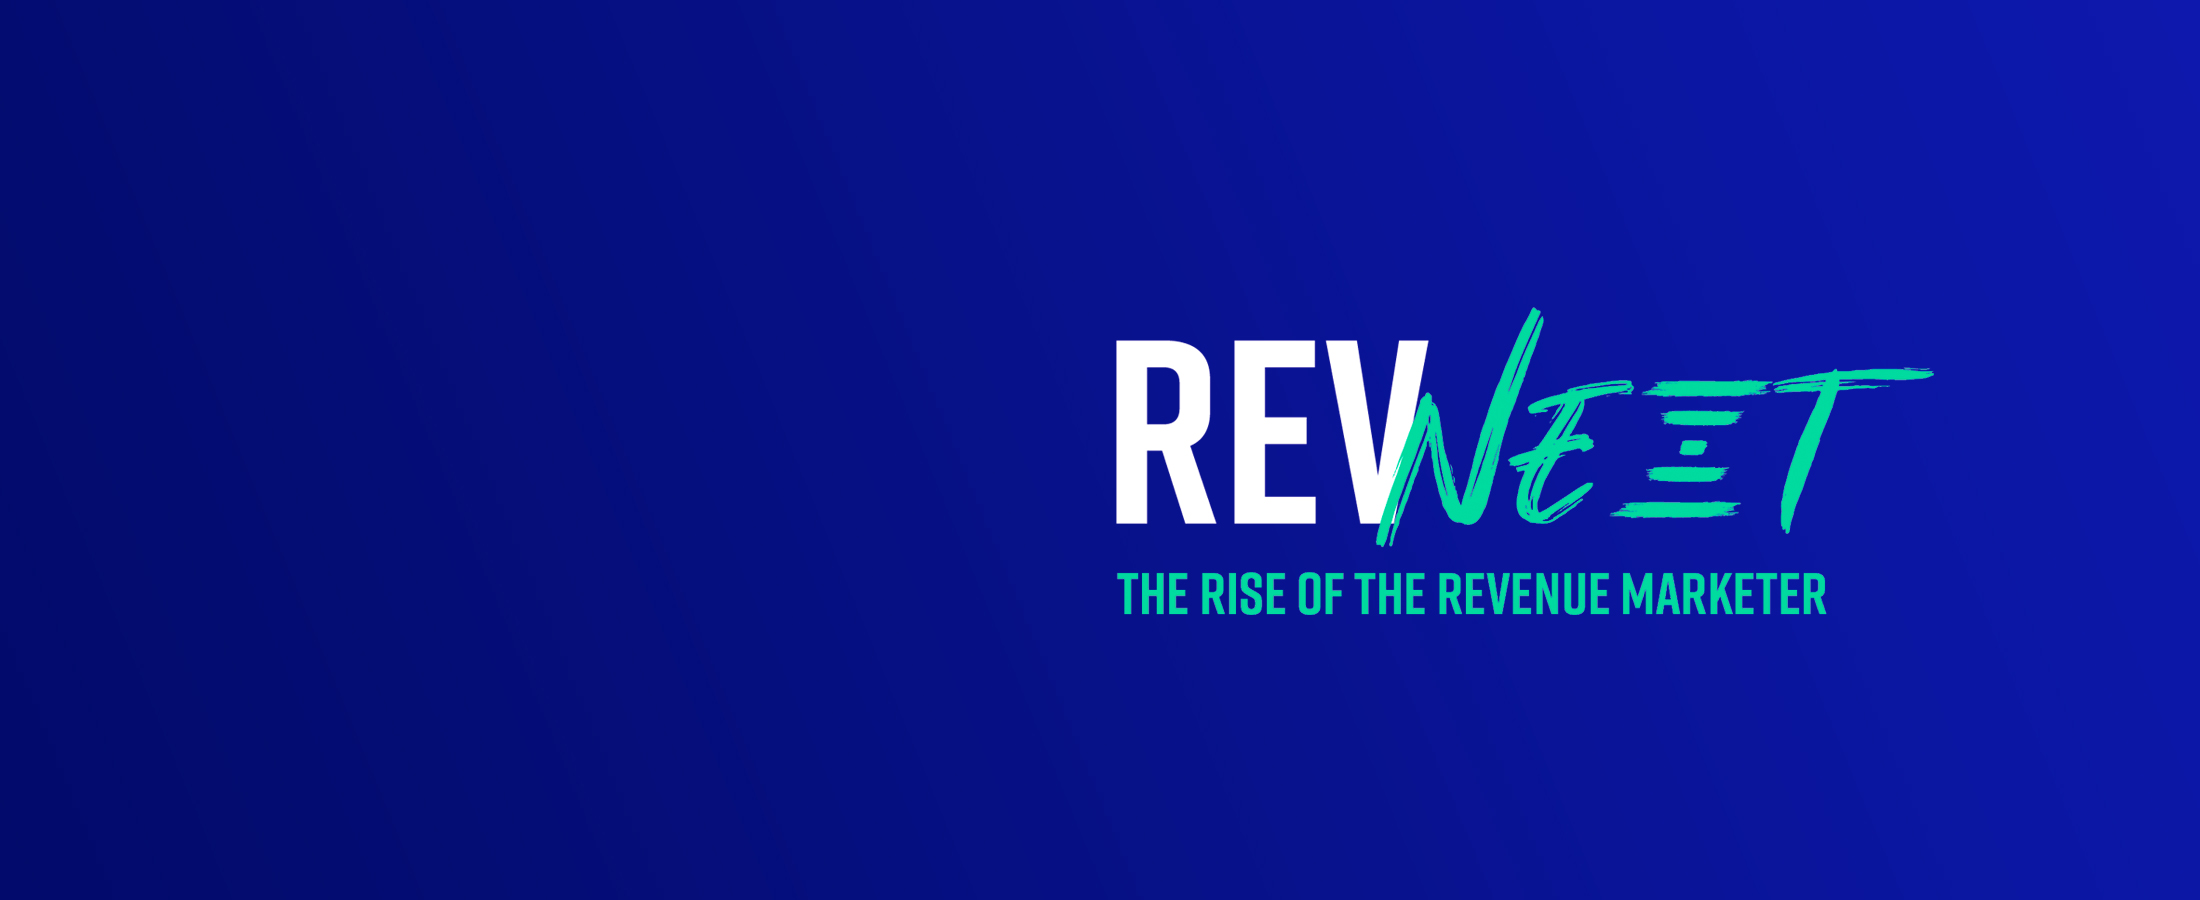 the rise of the revenue marketer.